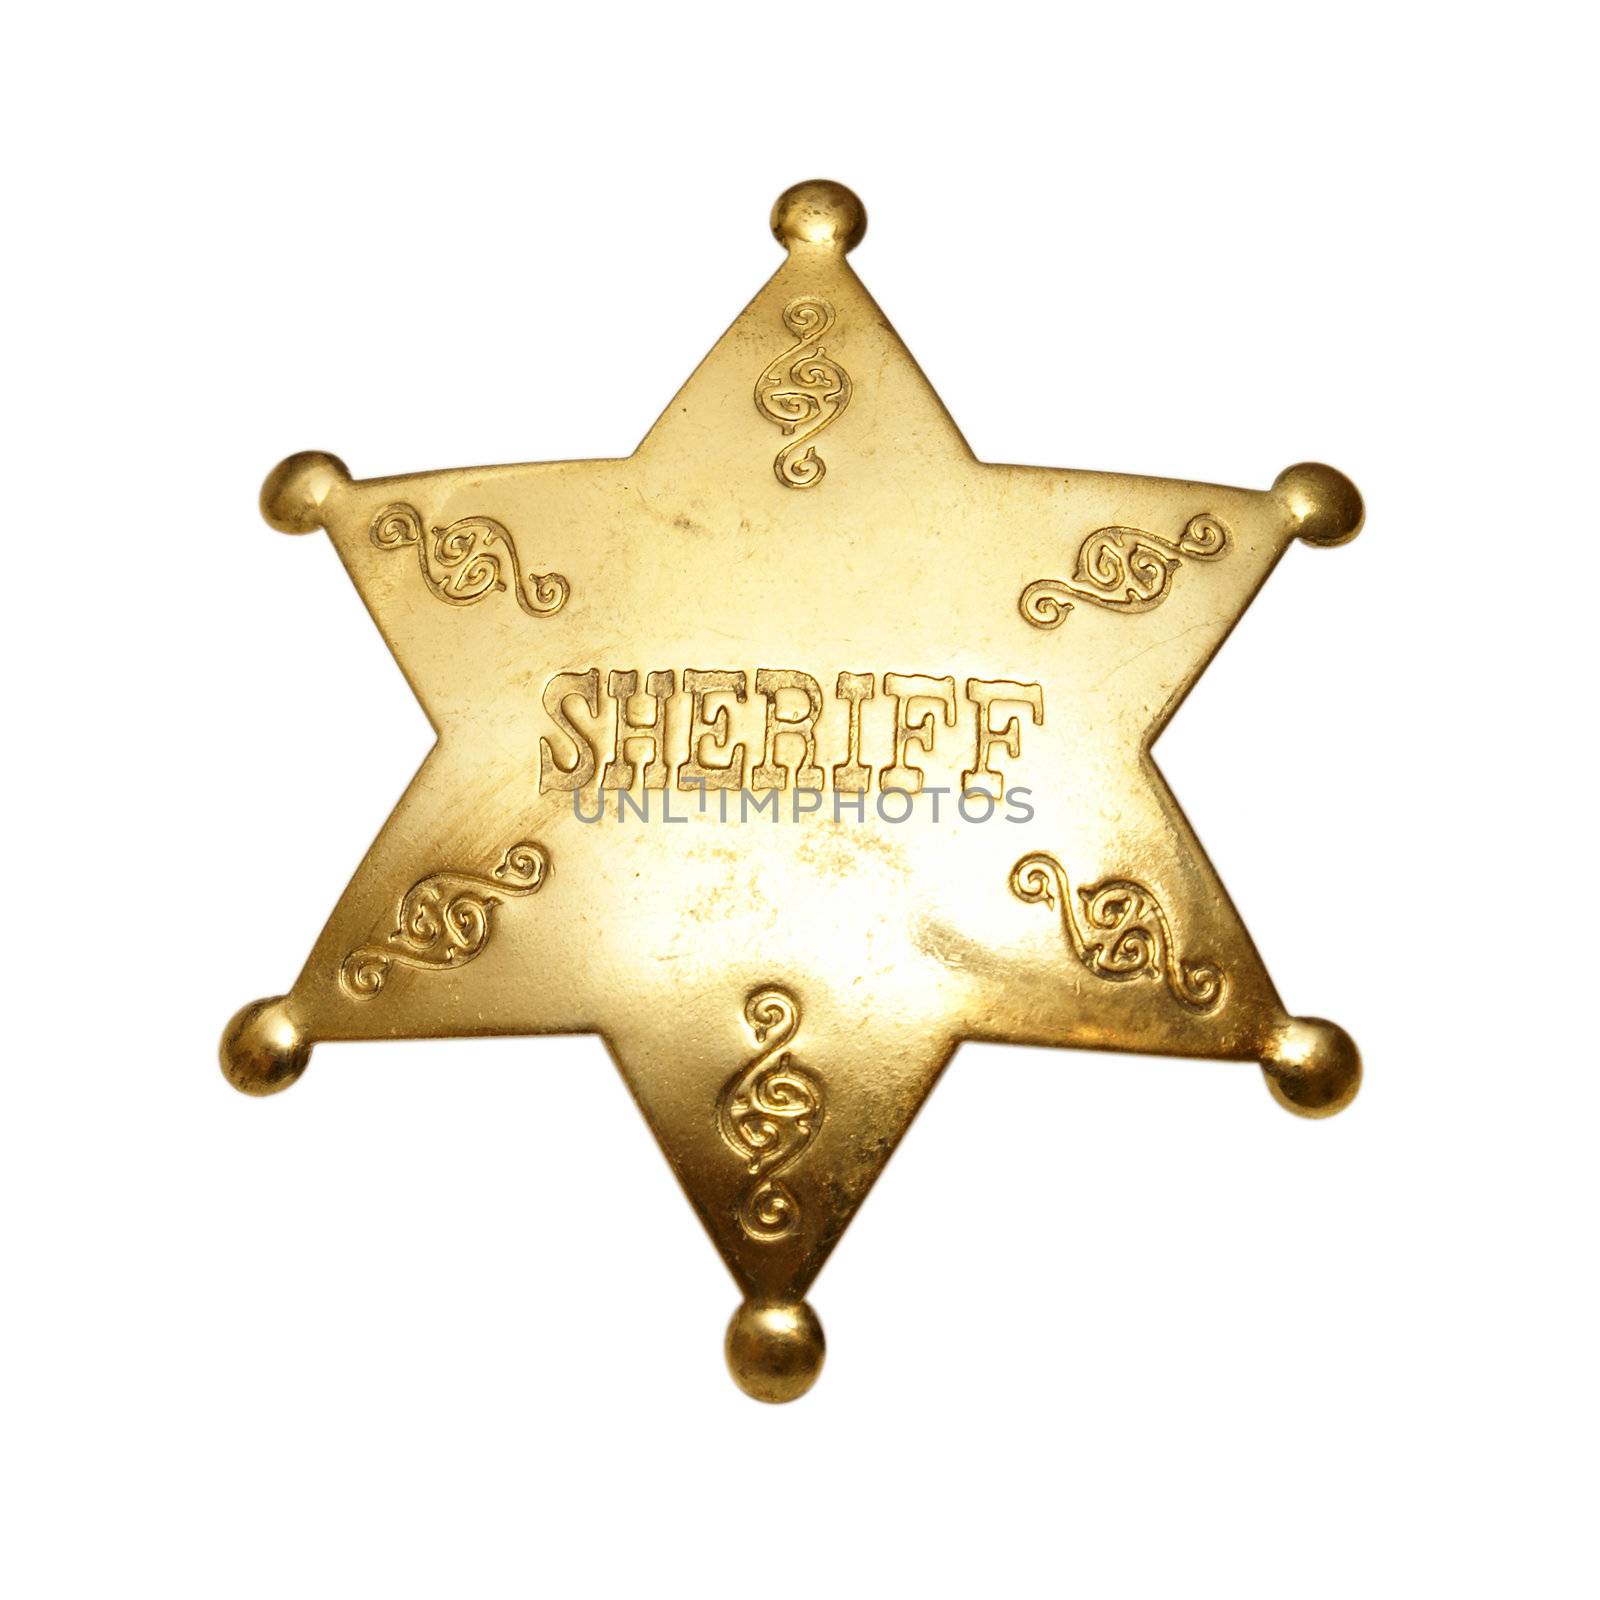 An isolated shot of a sheriff badge.